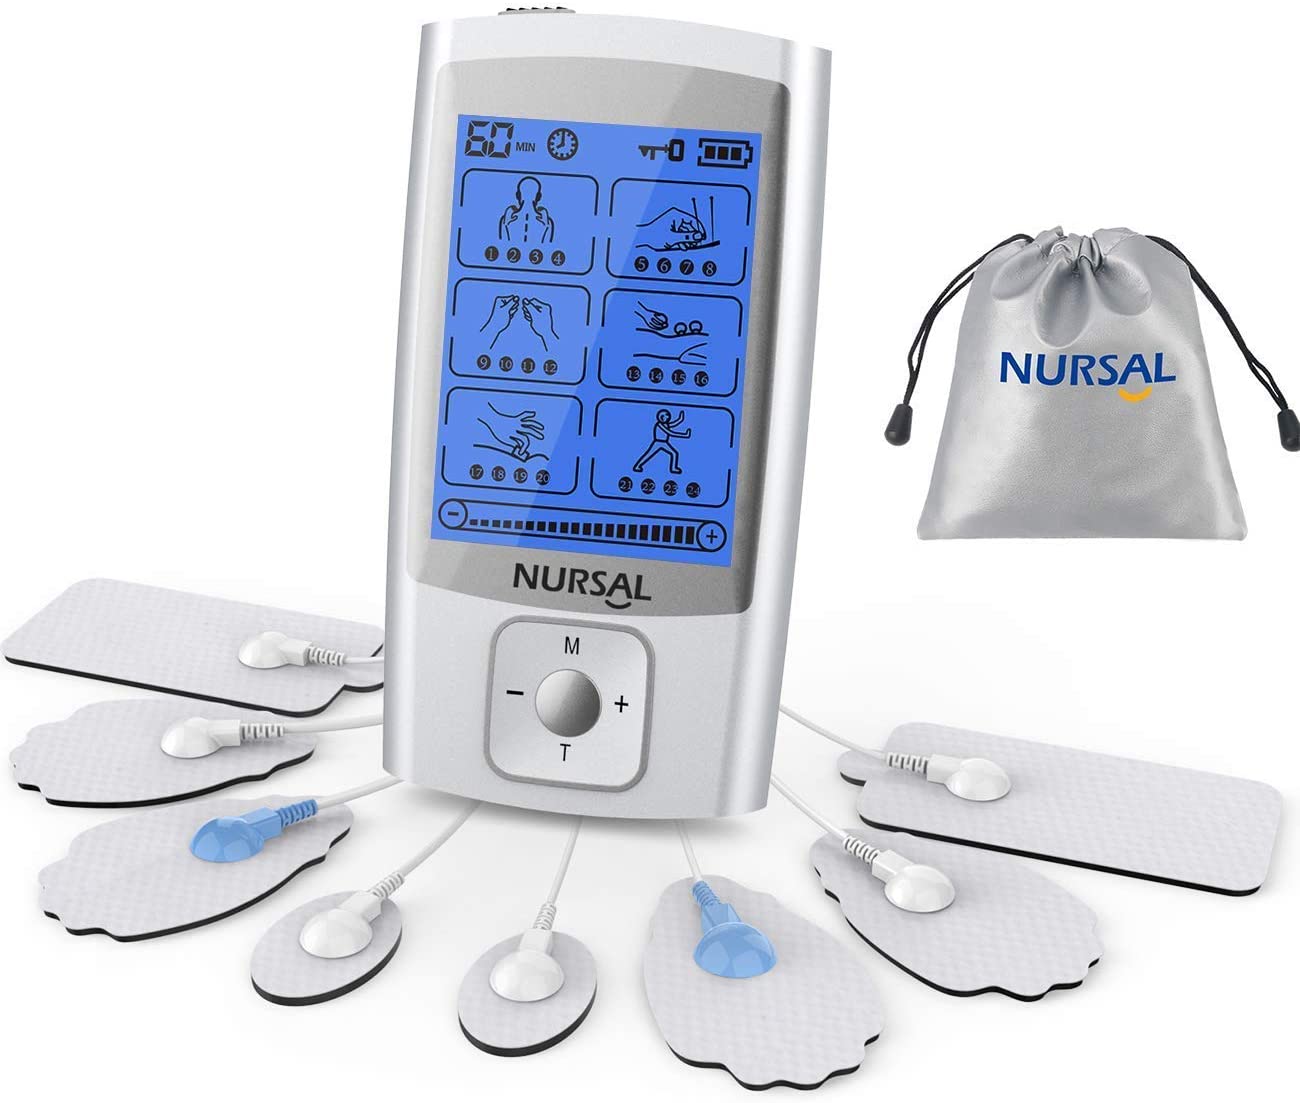 Therapy TENS Unit 4 Touch Screen Powerful Electronic Pulse Muscle Stim